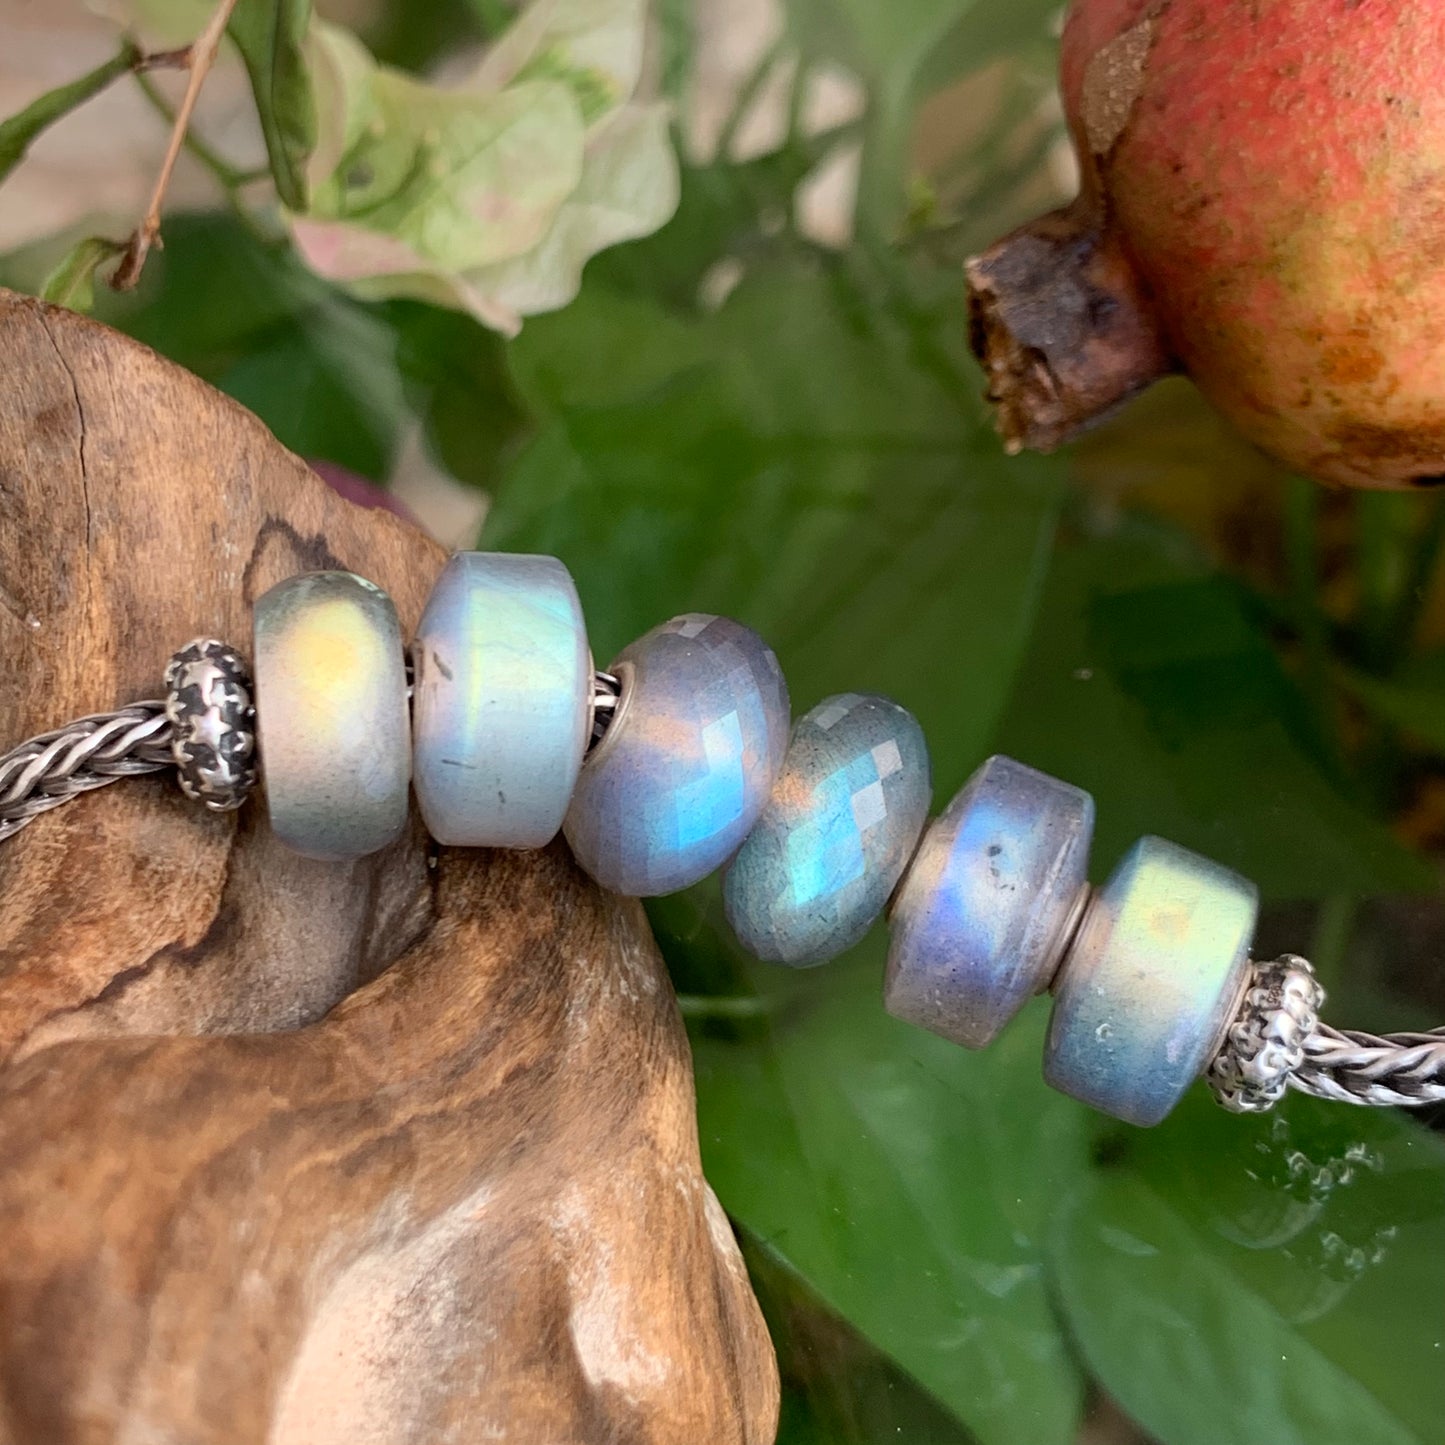 Charming Faceted Labradorite Beads and Smooth Wheel Shaped Labradorite Beads with Silver Core